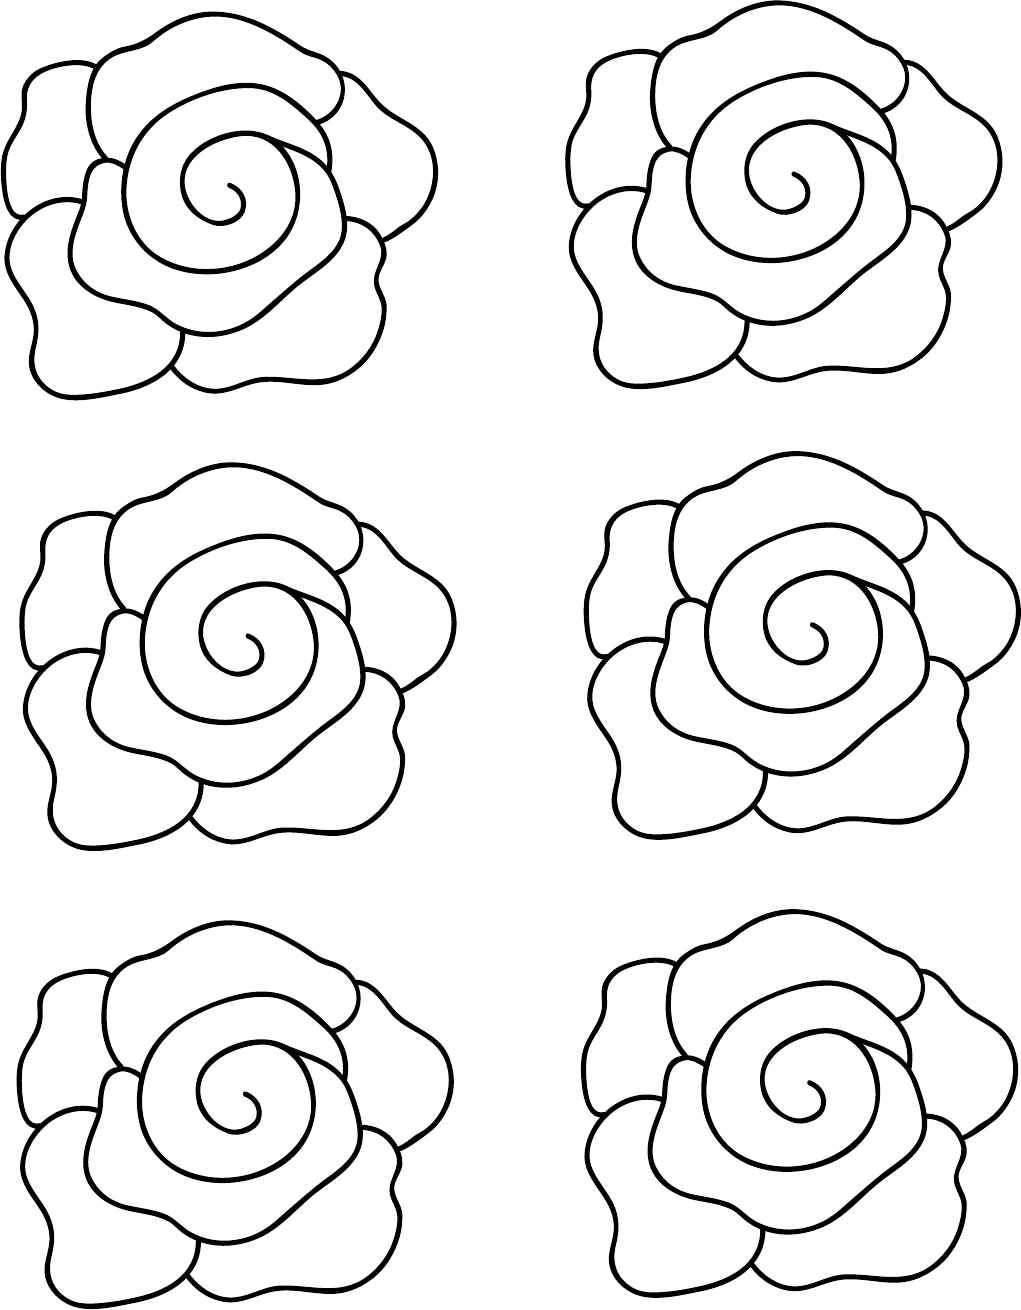 Flower Template of Roses